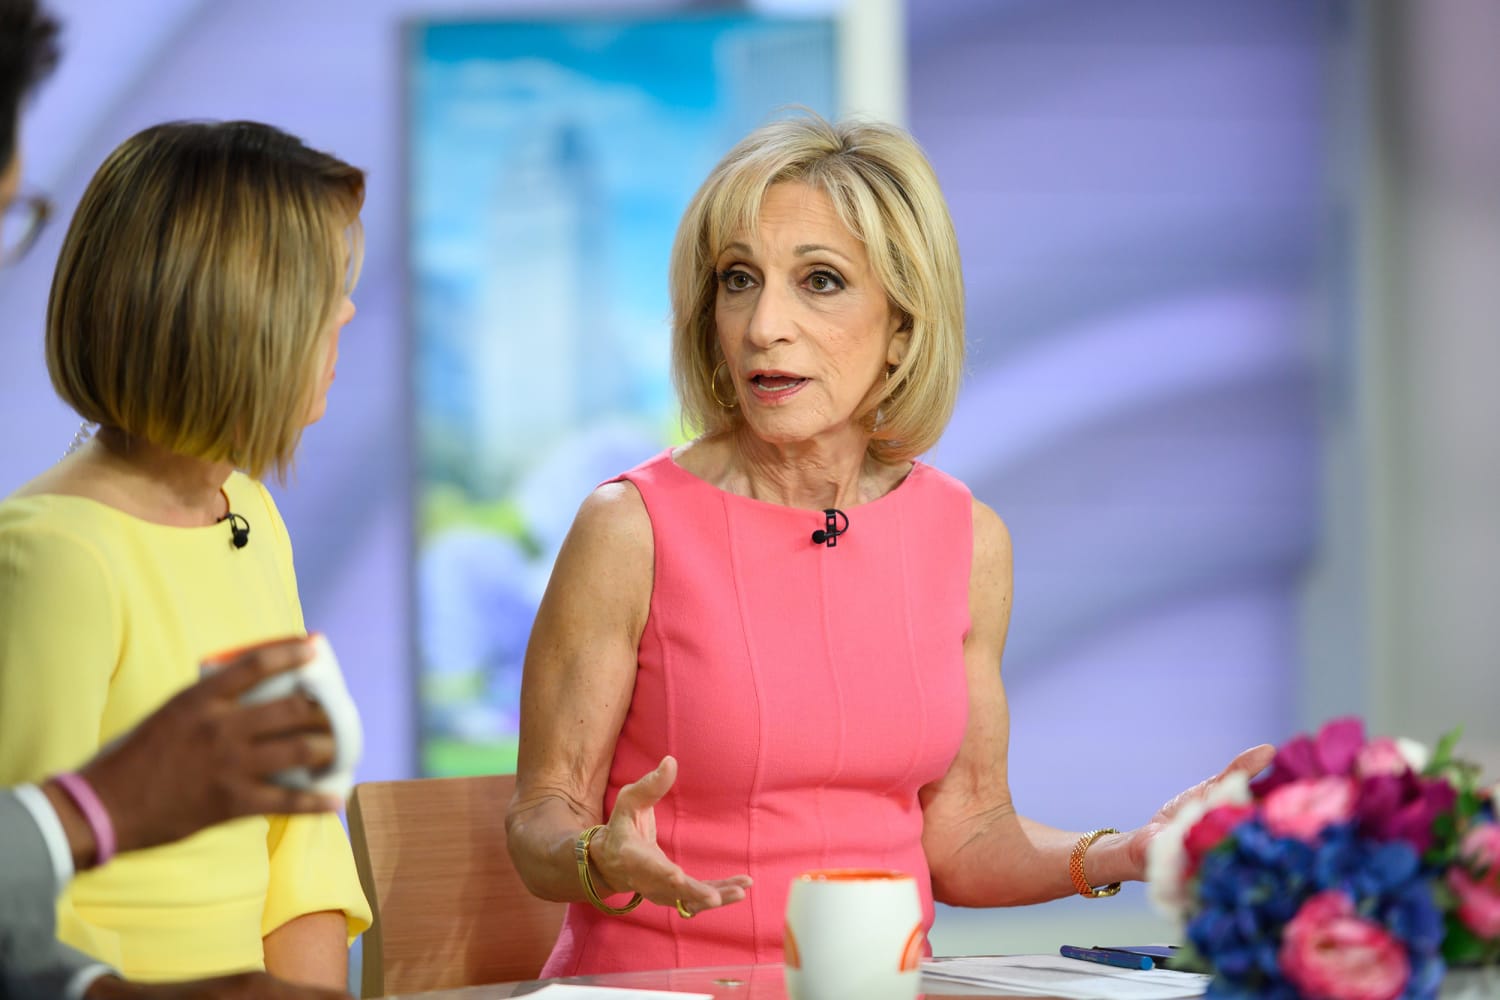 Andrea mitchell images